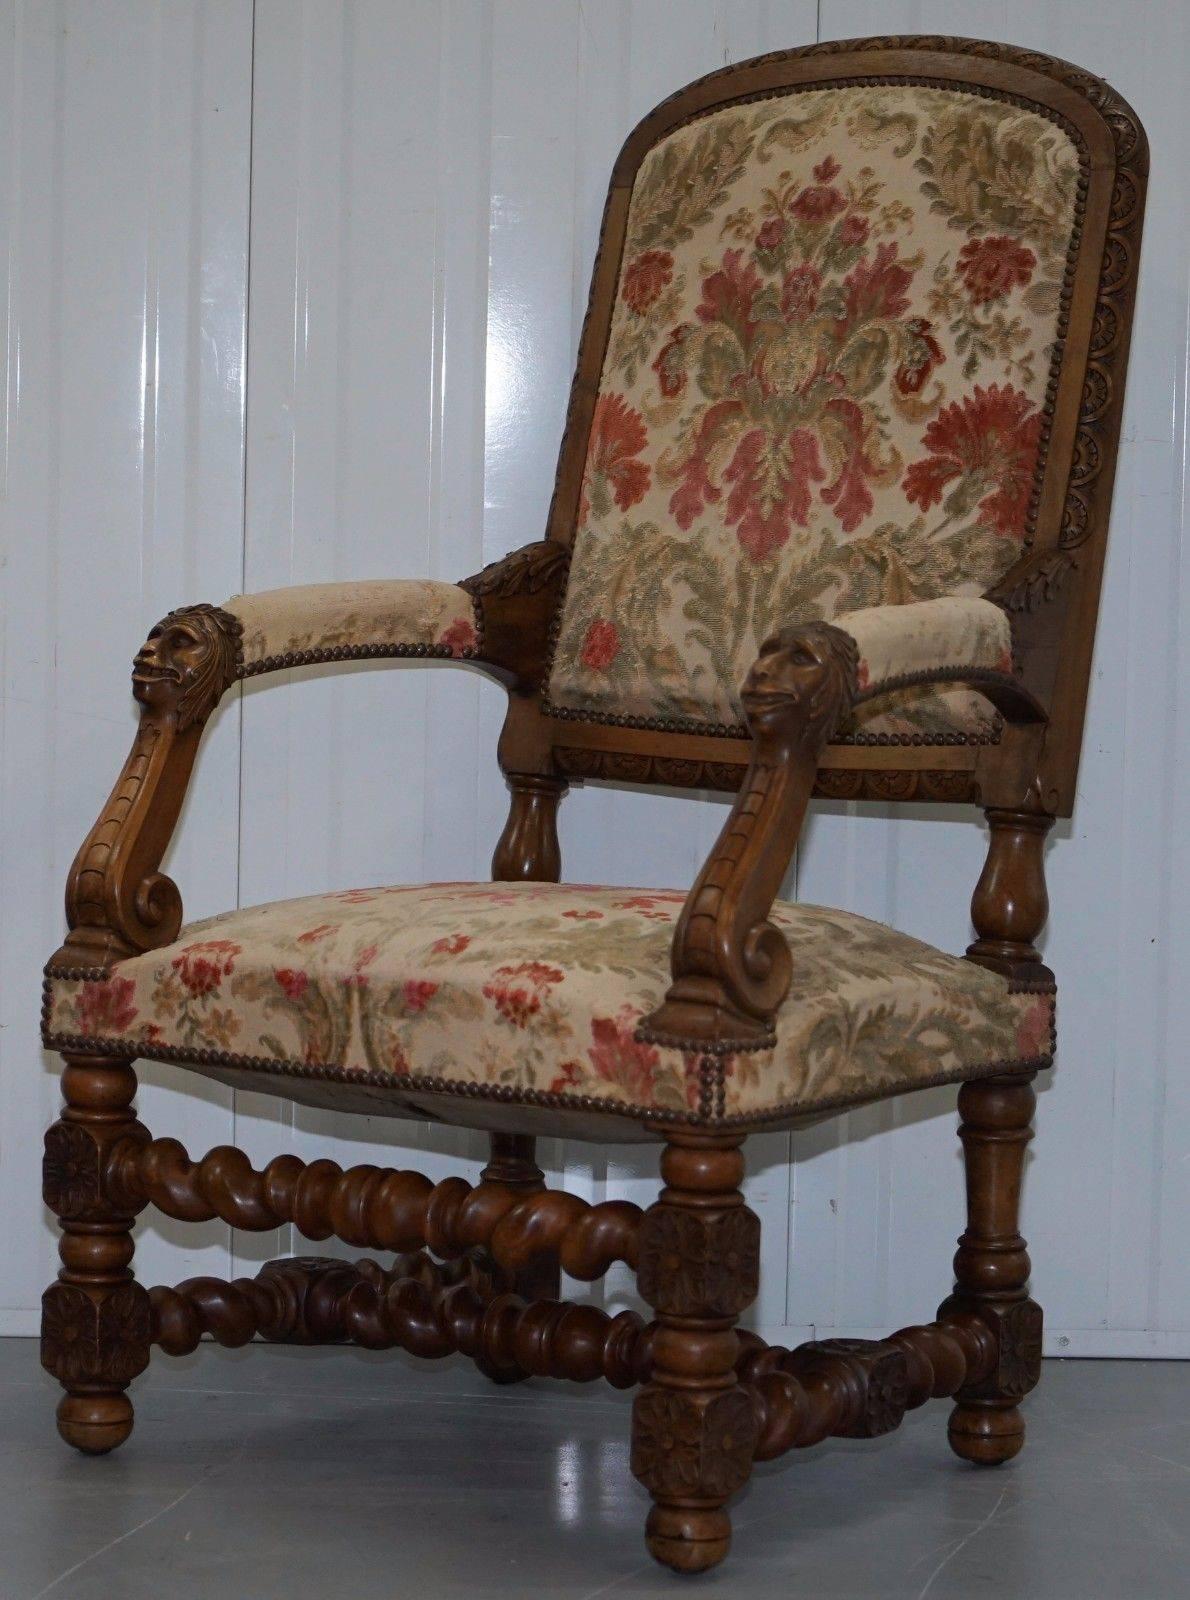 Wimbledon-Furniture

Wimbledon-Furniture is delighted to offer for sale this lovely pair of circa 1870 hand carved walnut throne chairs depicting Lion’s heads with original distressed upholstery

Please note the delivery fee listed is just a guide,